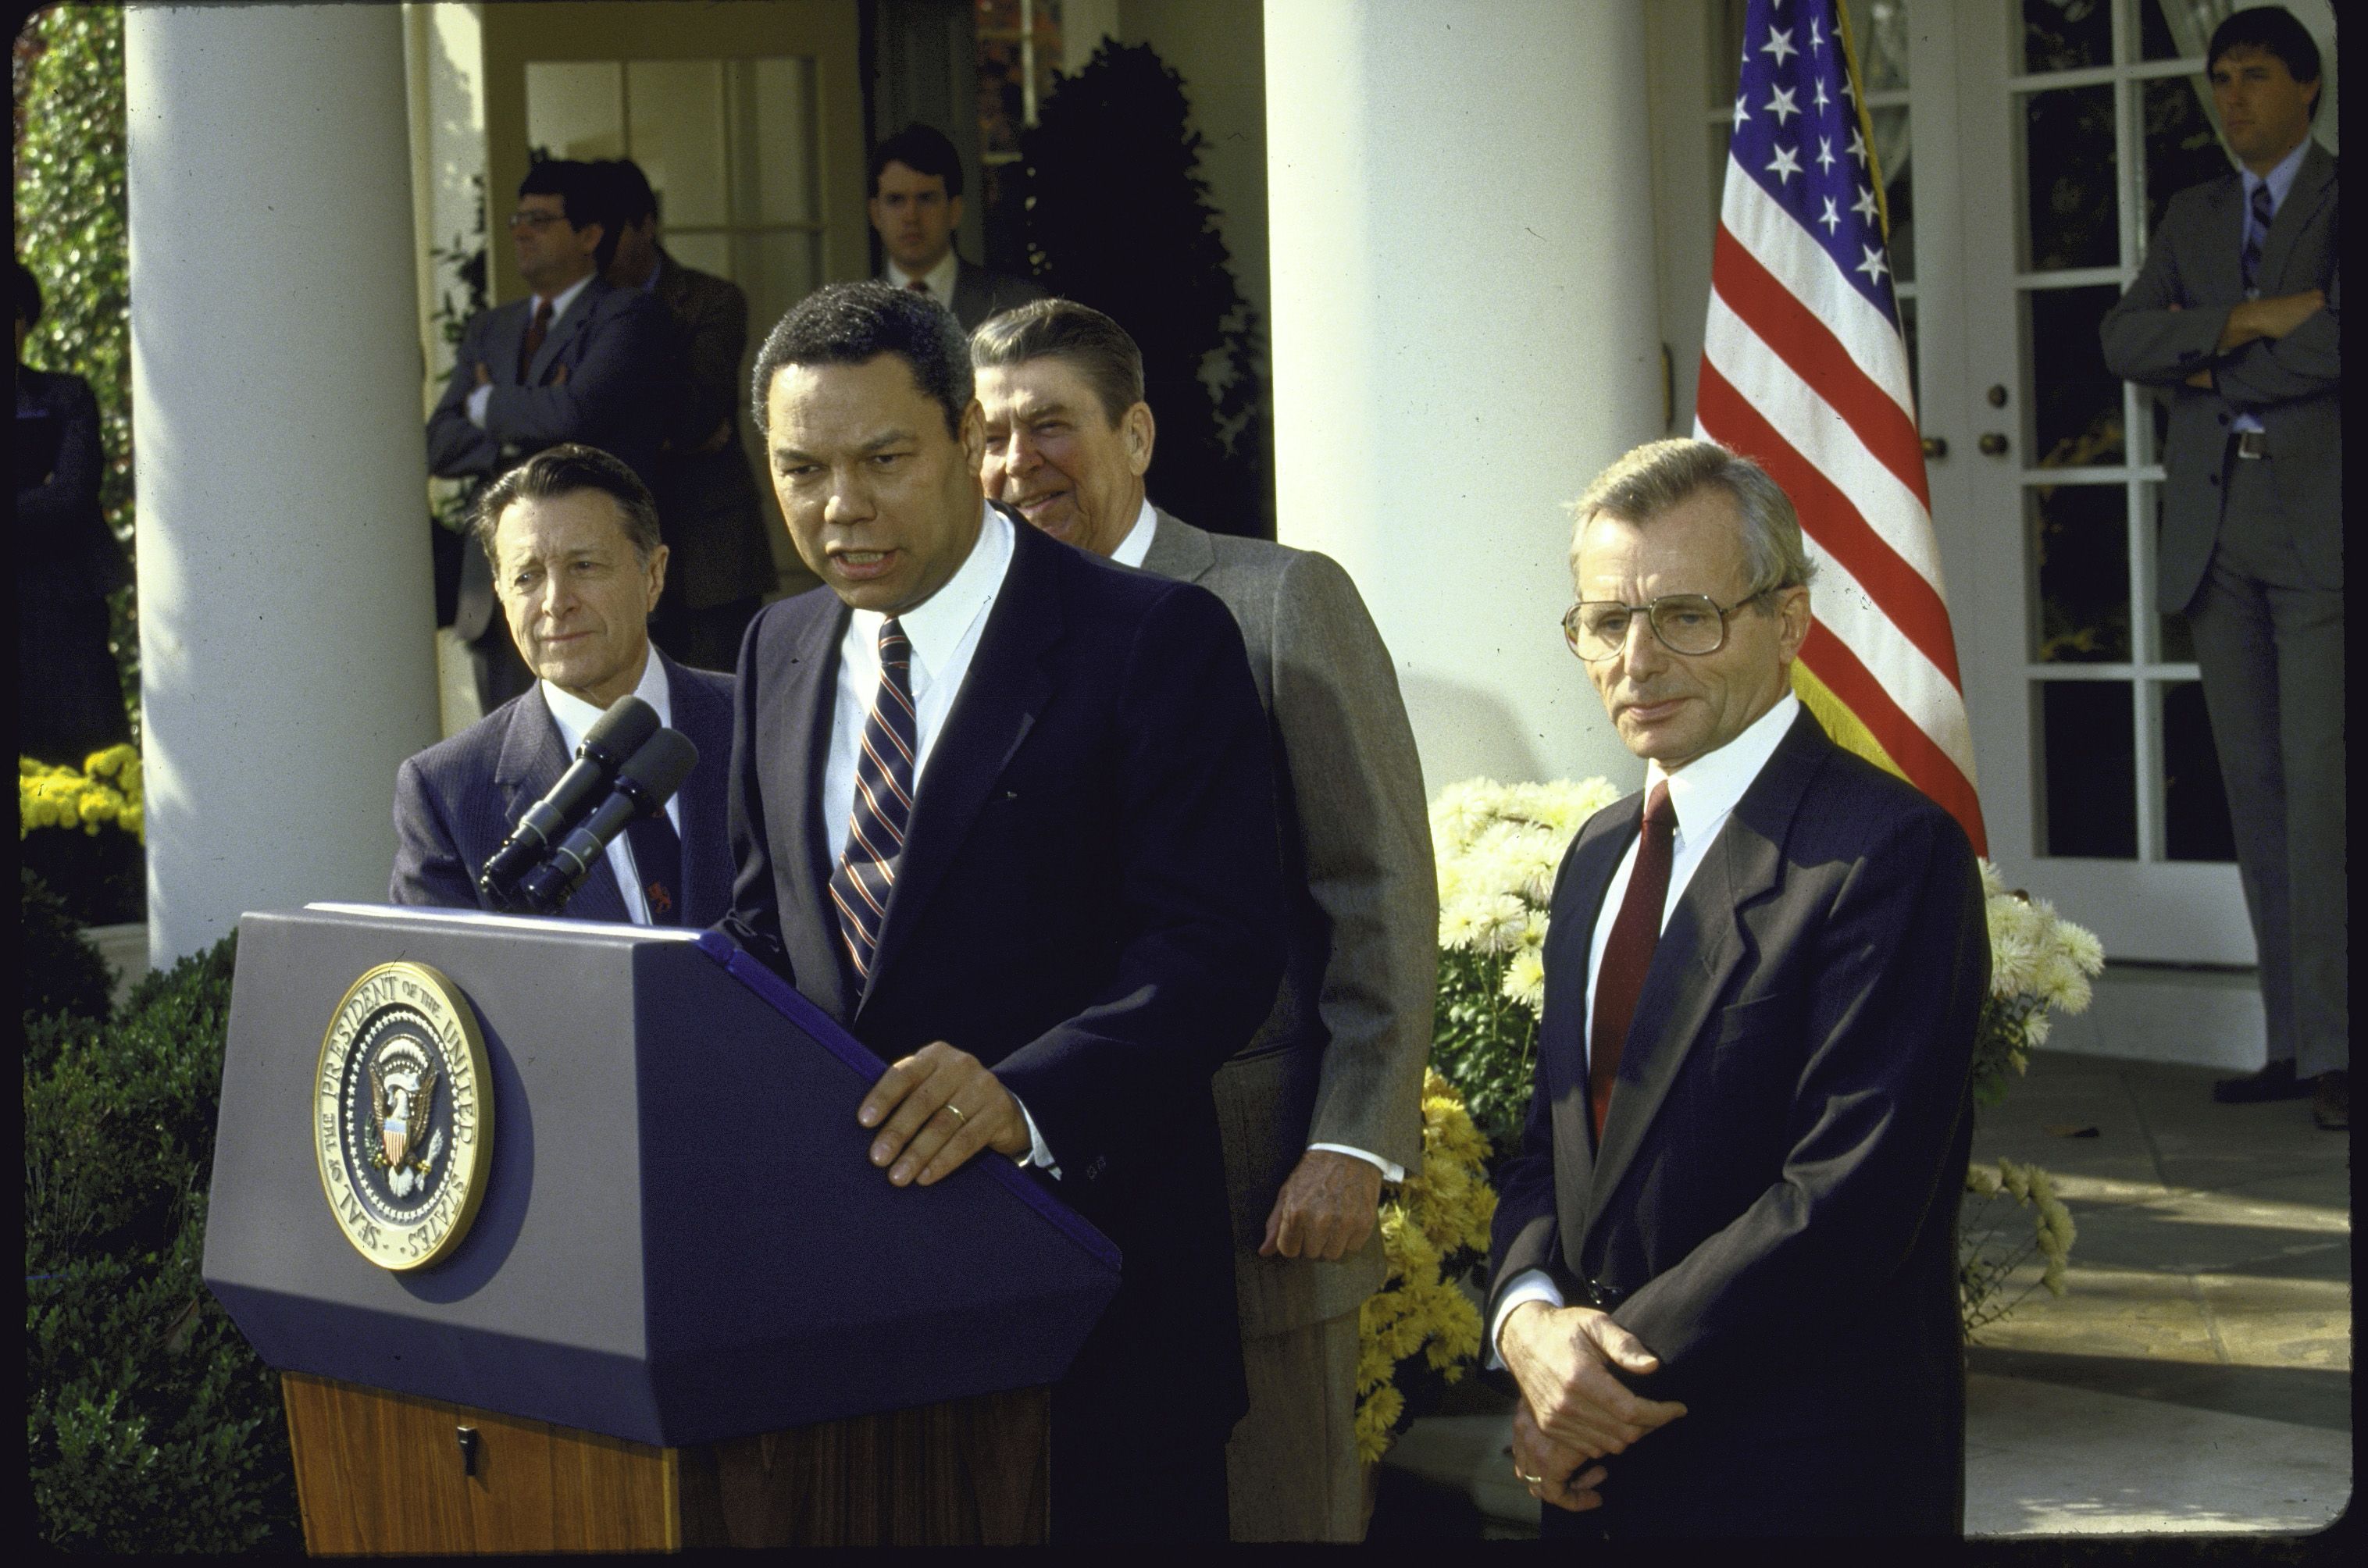 Colin Powell speaking at the Rose Garden with former President Ronald Reagan.